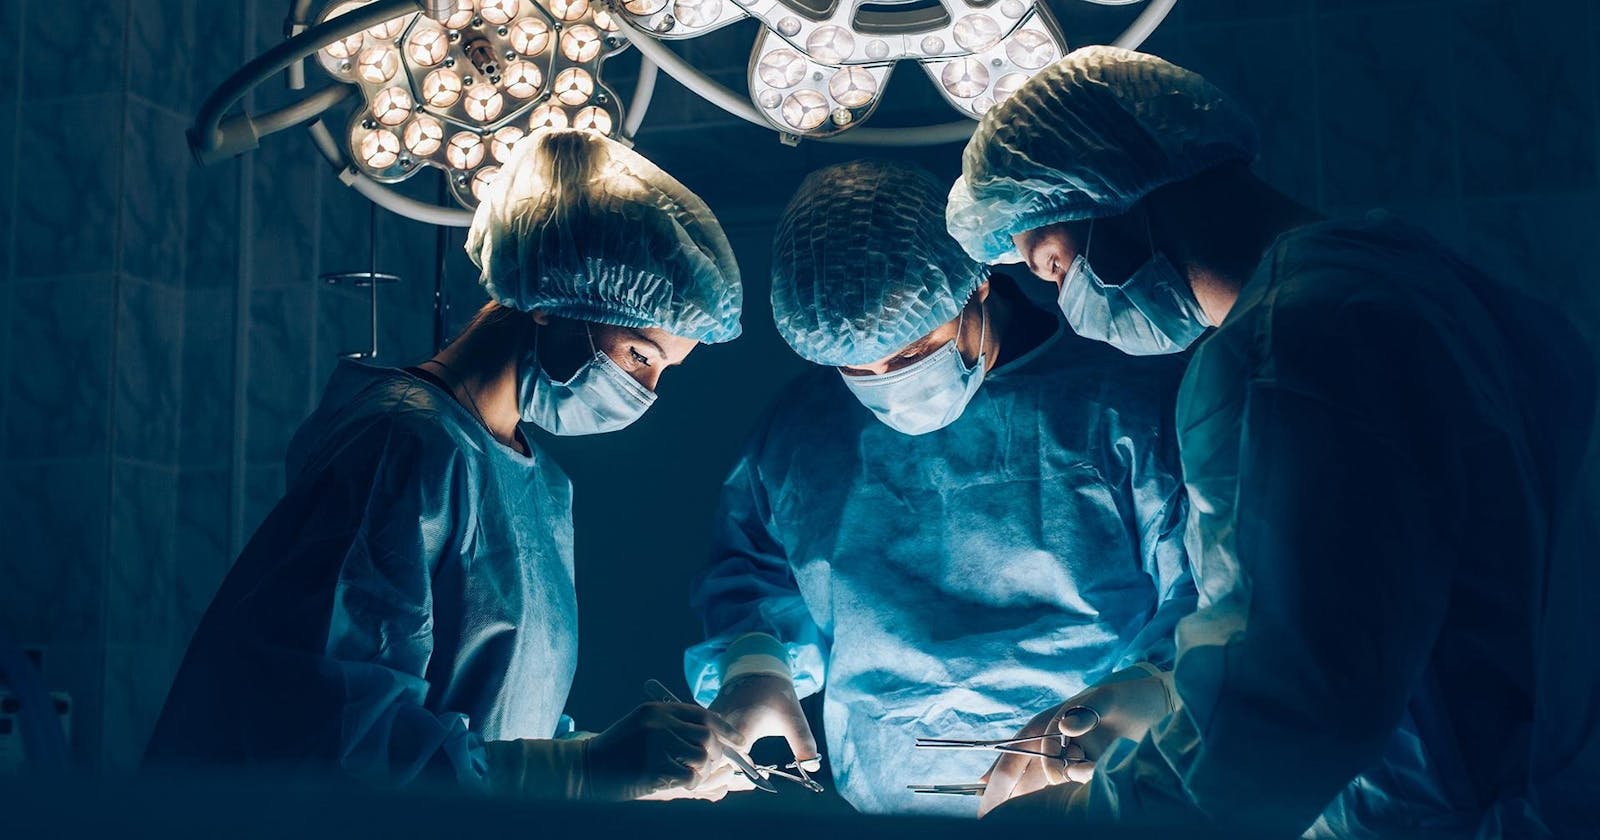 A Brief Look Into the Intricacies Surrounding AR Implementation in Surgical Procedures